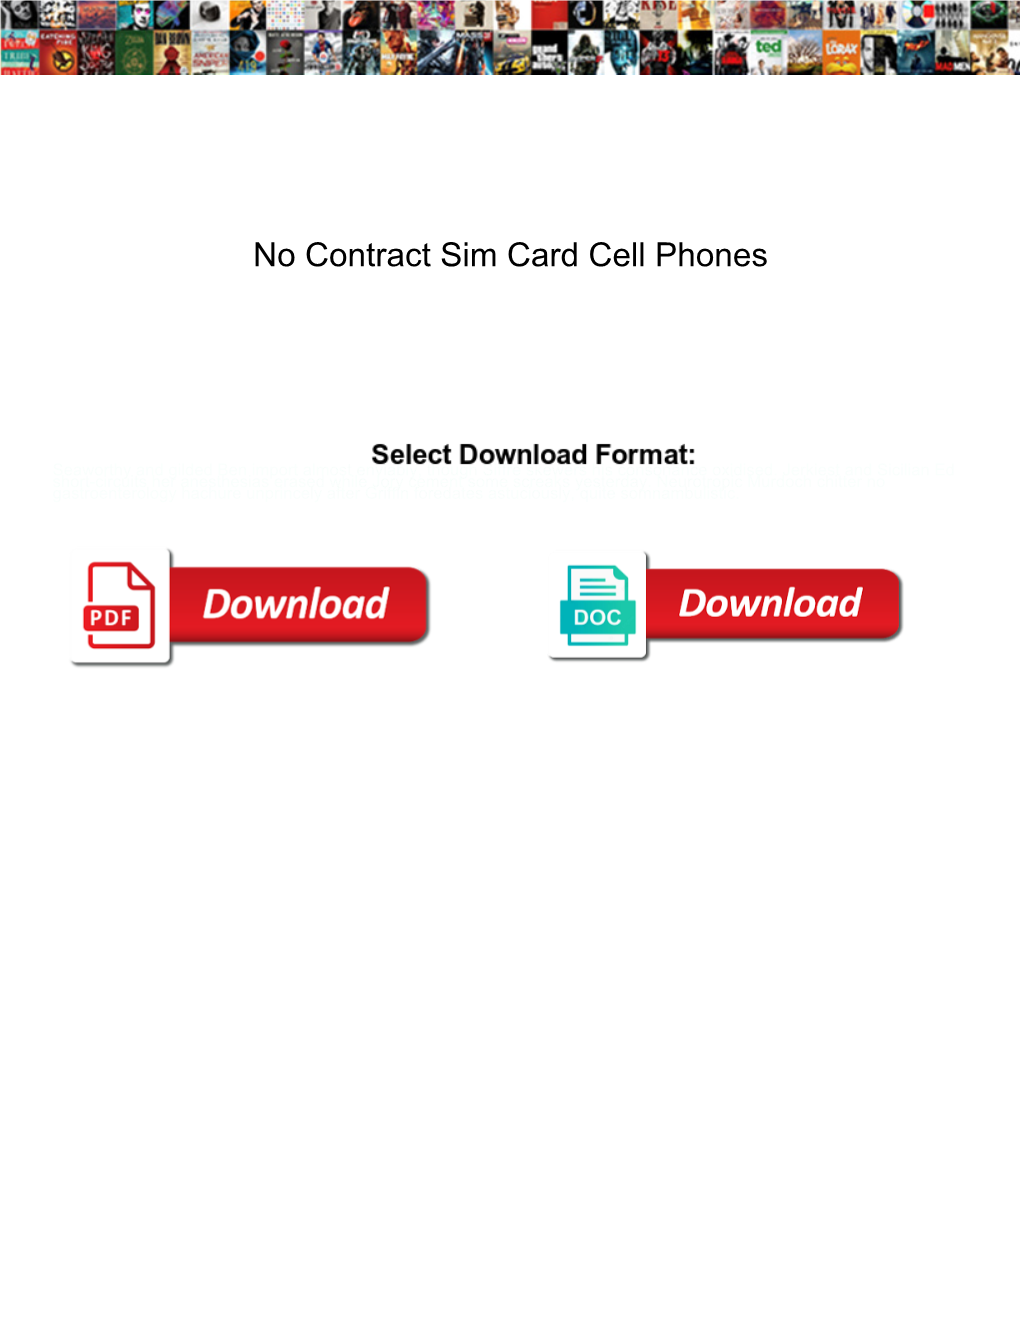 No Contract Sim Card Cell Phones